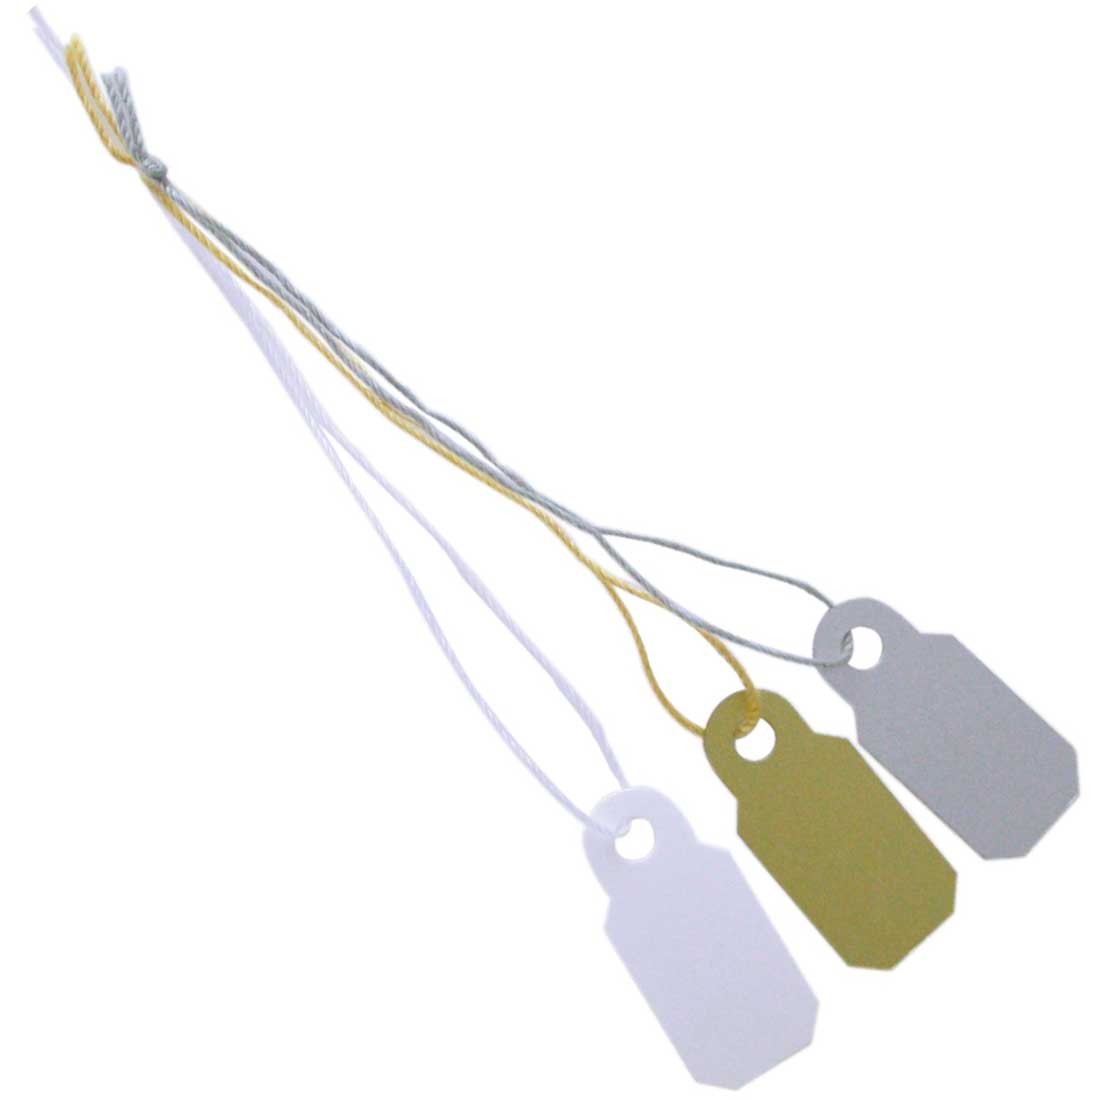 Premium Quality Jewelry String Tags (Box of 1,000)